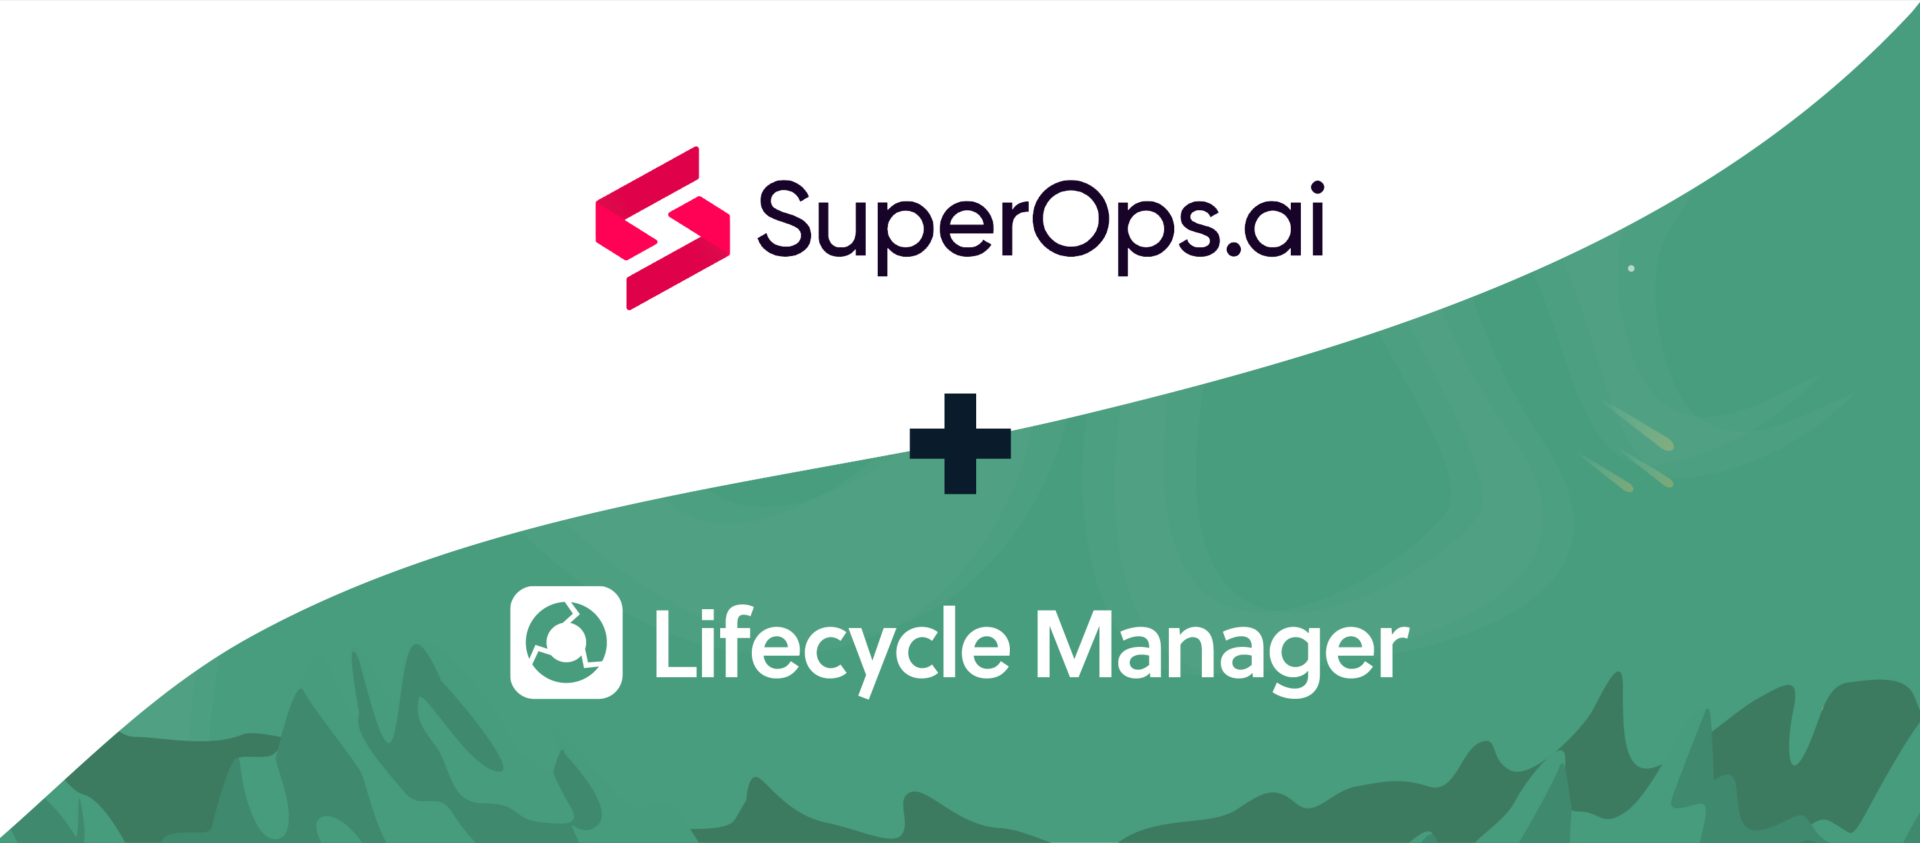 SuperOps and Lifecycle Manager